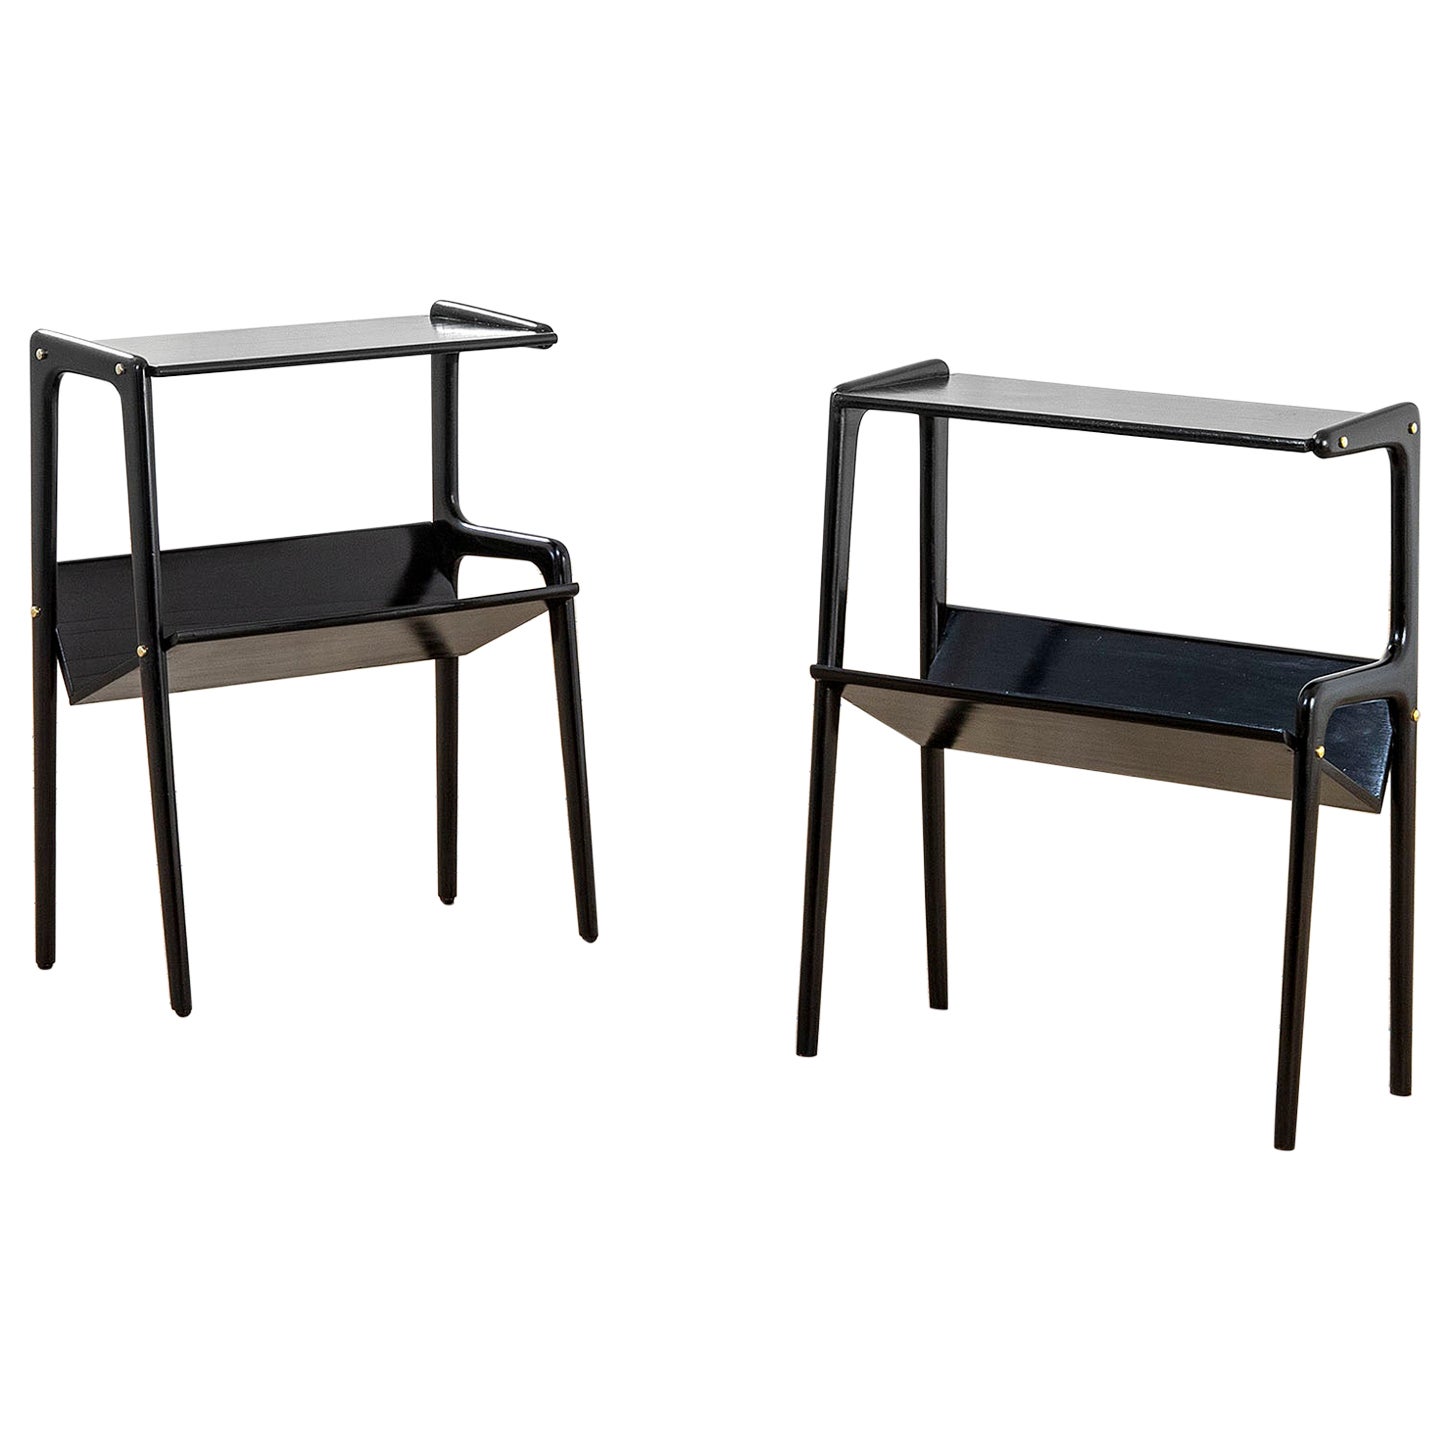 20th Century Ico Parisi Pair of Magazine Racks in Black Lacquered Wood, 1950s For Sale